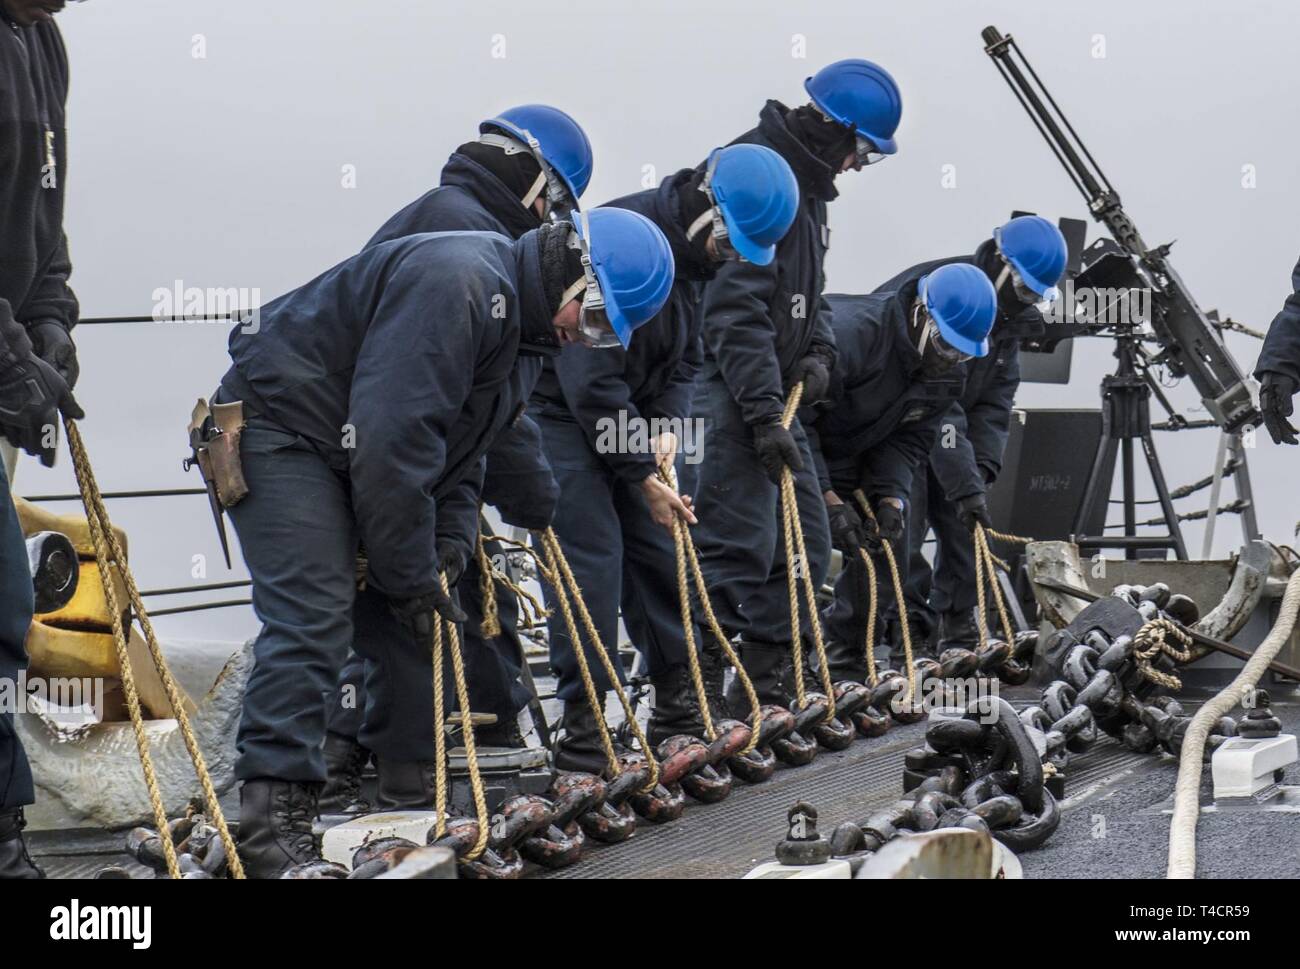 190320-N-KA046-0183  ENGLISH CHANNEL (March 20, 2019) Sailors participate in a mooring to buoy exercise in support of Flag Officer Sea Training aboard the Arleigh Burke-class guided-missile destroyer USS Porter (DDG 78) in the English Channel, March 20, 2019. Porter, forward-deployed to Rota, Spain, is on its sixth patrol in the U.S. 6th Fleet area of operations in support of U.S national security interests in Europe and Africa. (U.S. Navy photo by Mass Communication Specialist 2nd Class James R. Turner/Released) Stock Photo